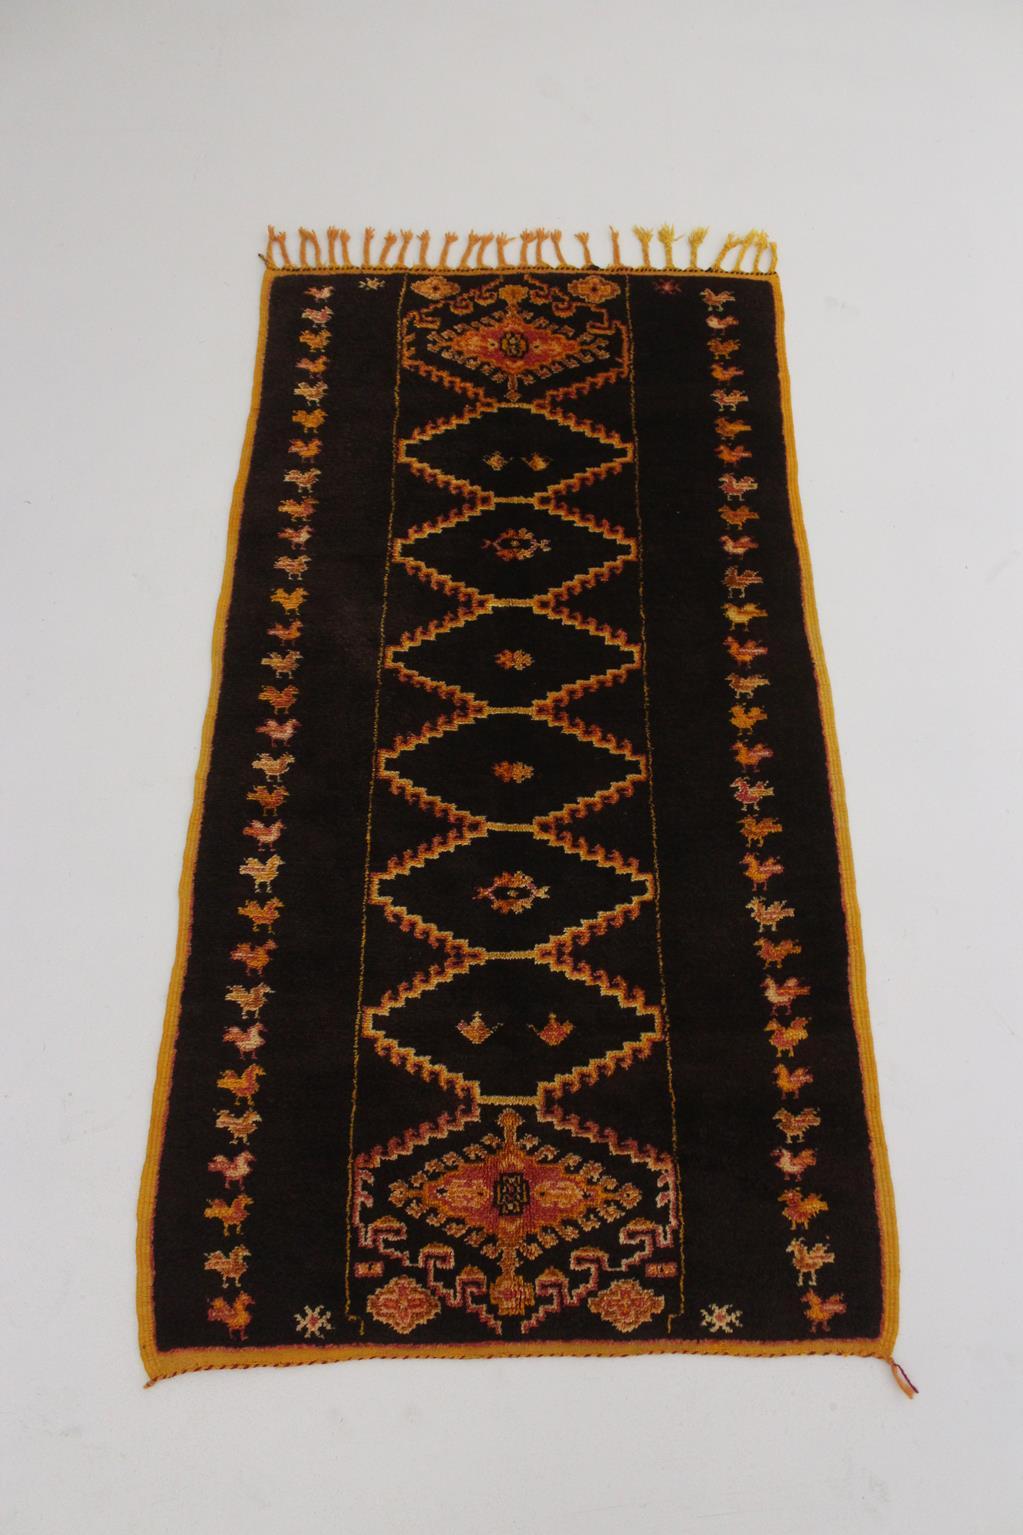 I sourced this rug in the city of Taznakht, southern part of Morocco, where these typical rugs are handmade by berber women. I have always loved a good, unique, vintage, oriental inspired Taznakht rug with a mix of black and bright, saffron color!